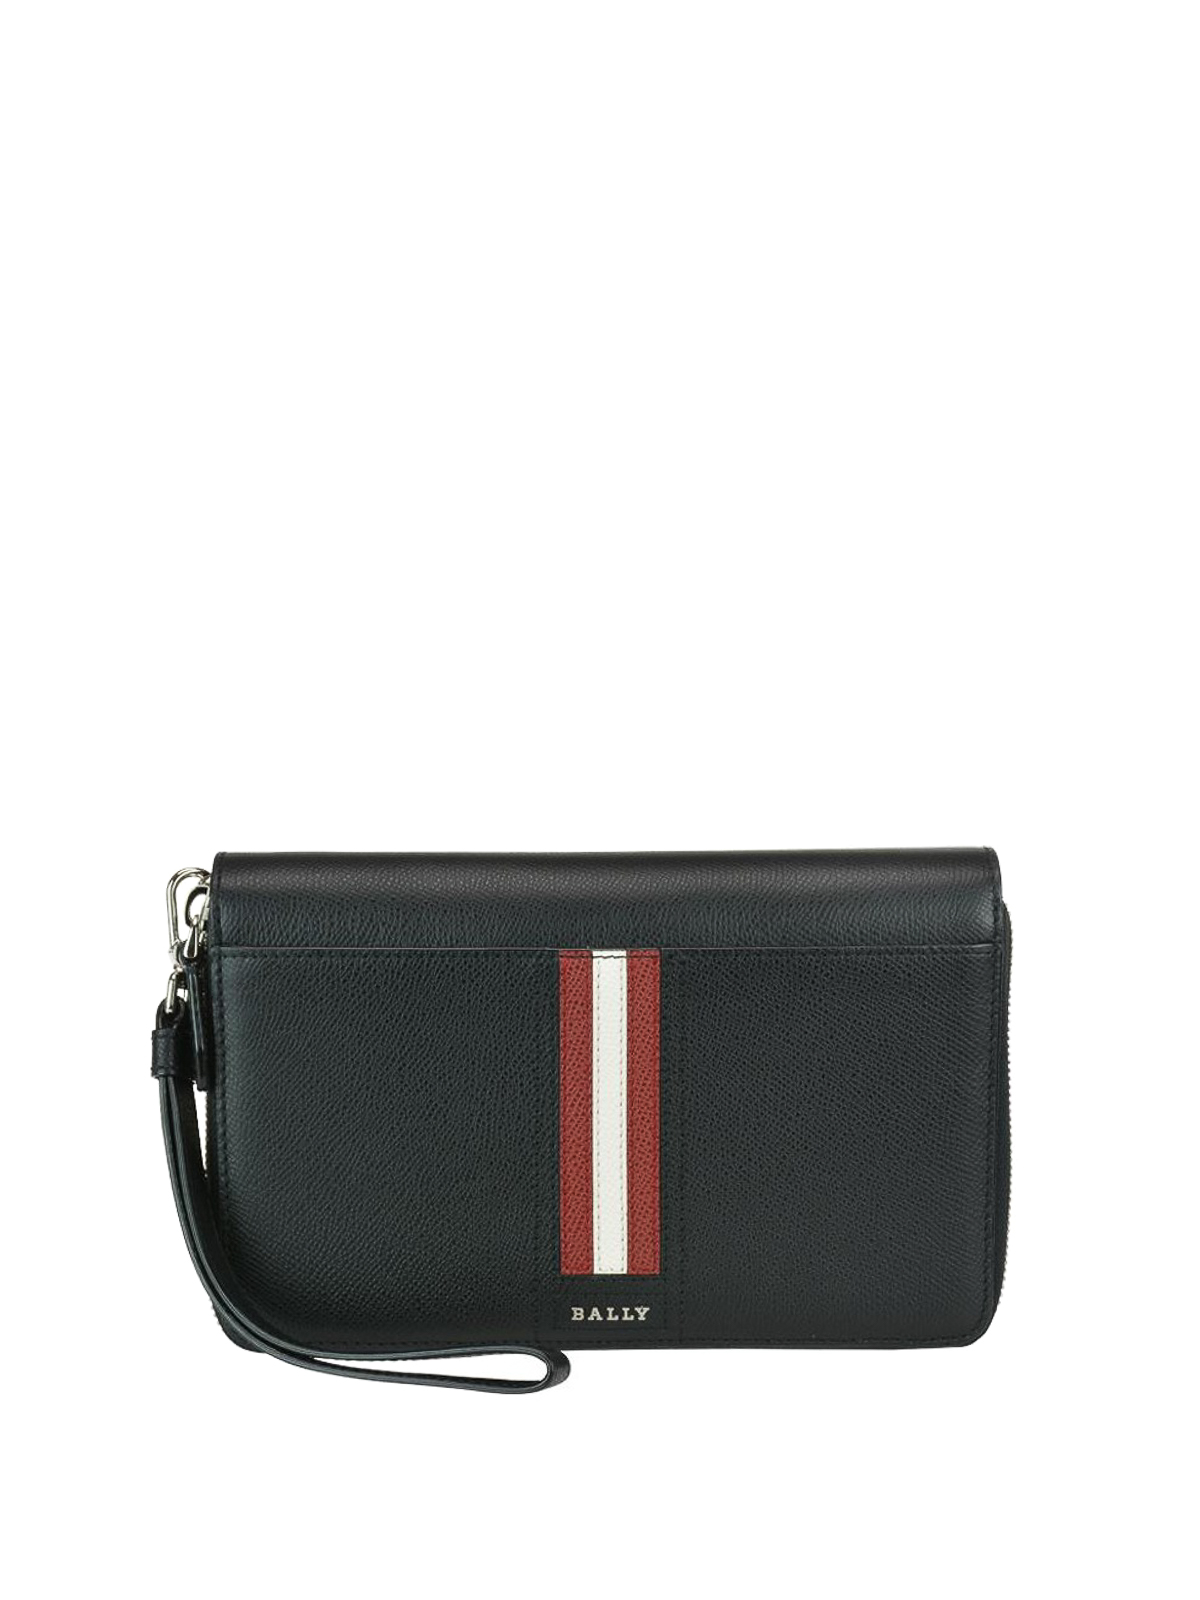 Bally - Tinger black leather clutch bag - clutches - 6218079